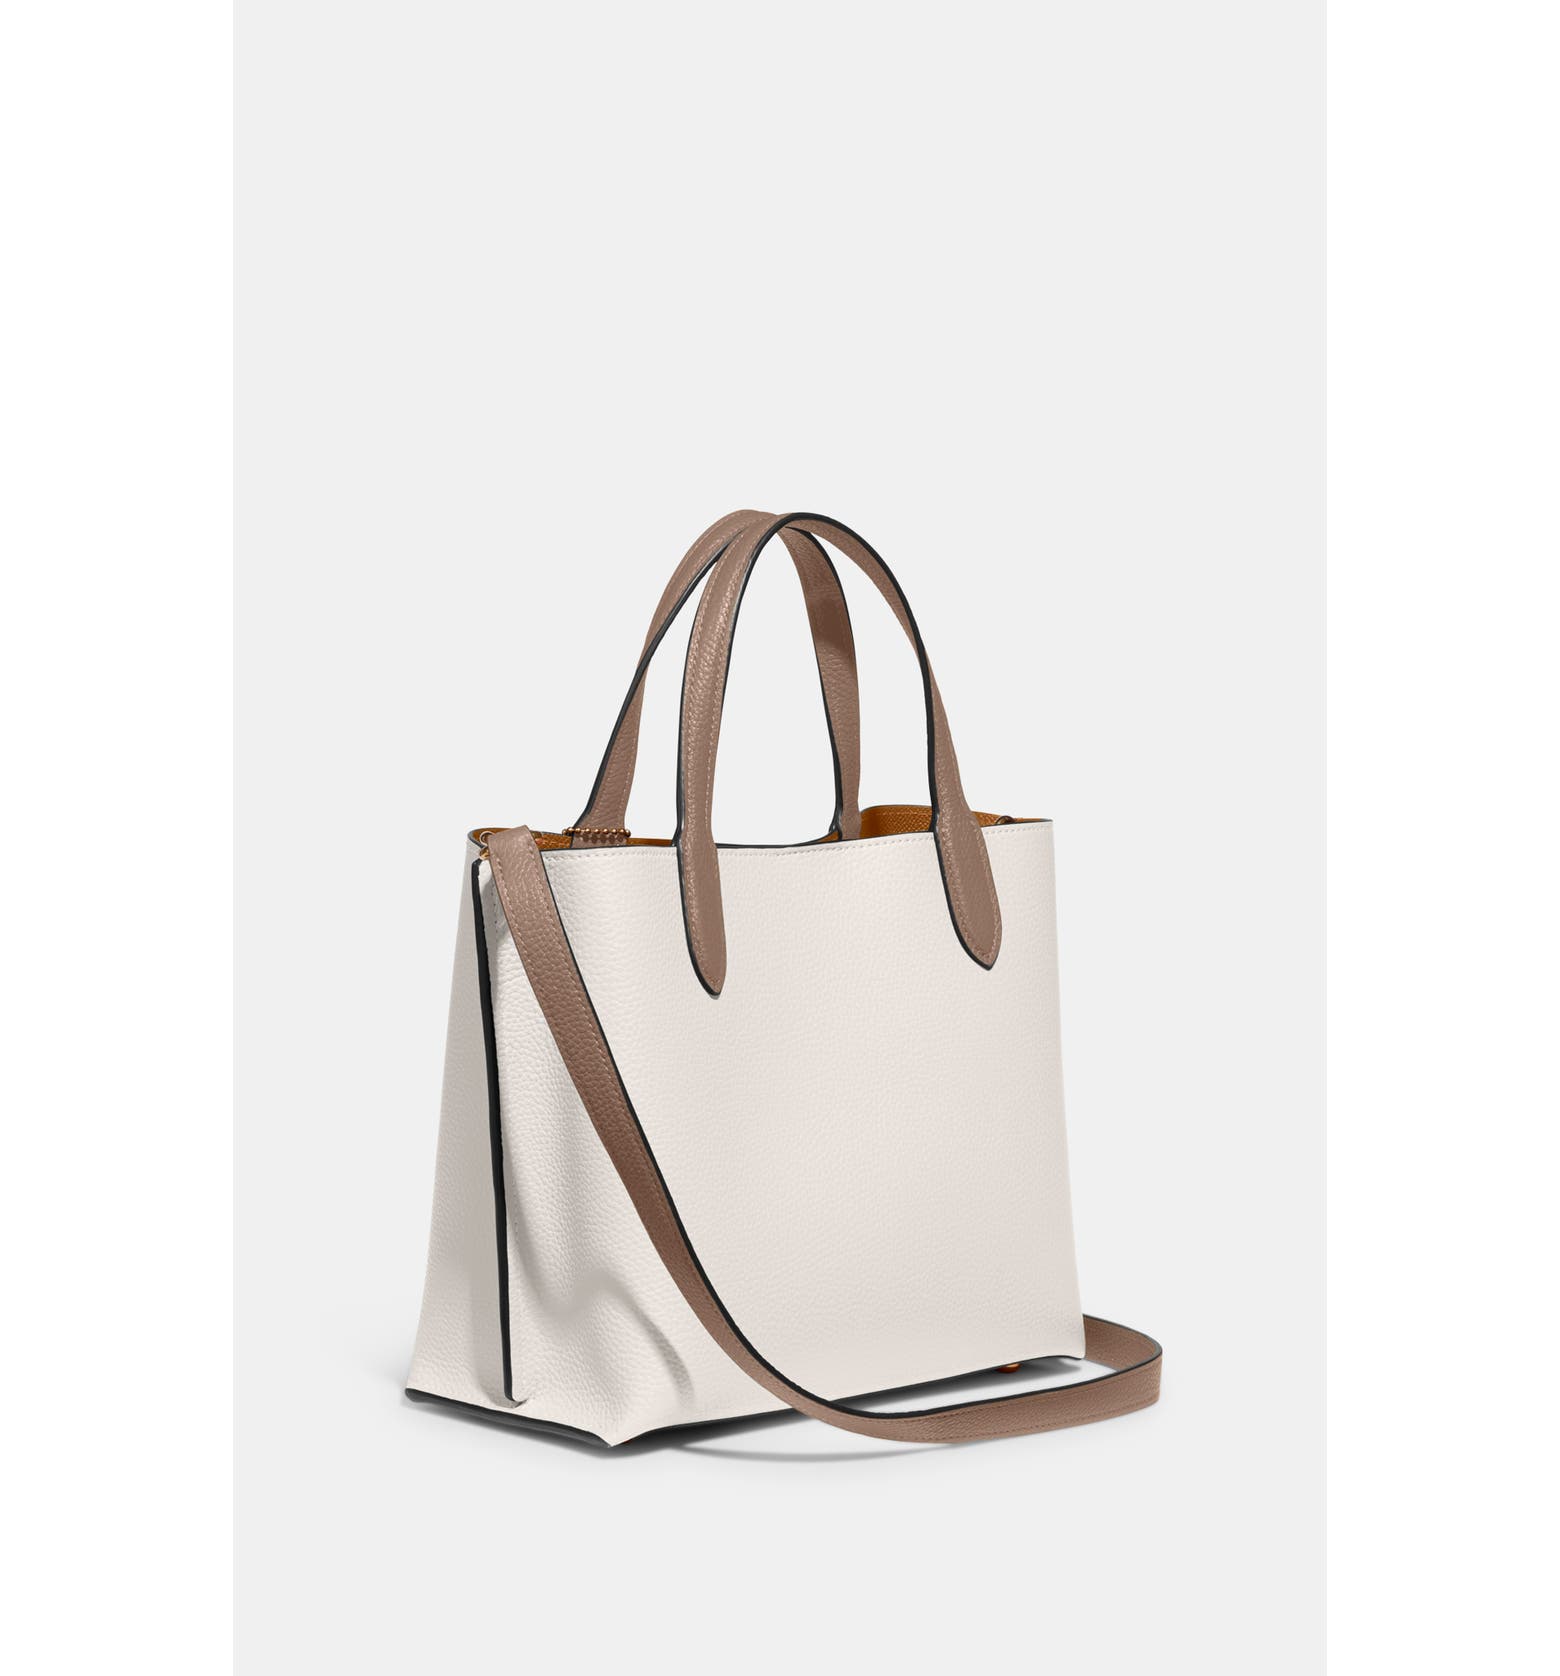 COACH Willow Leather Tote | Nordstrom